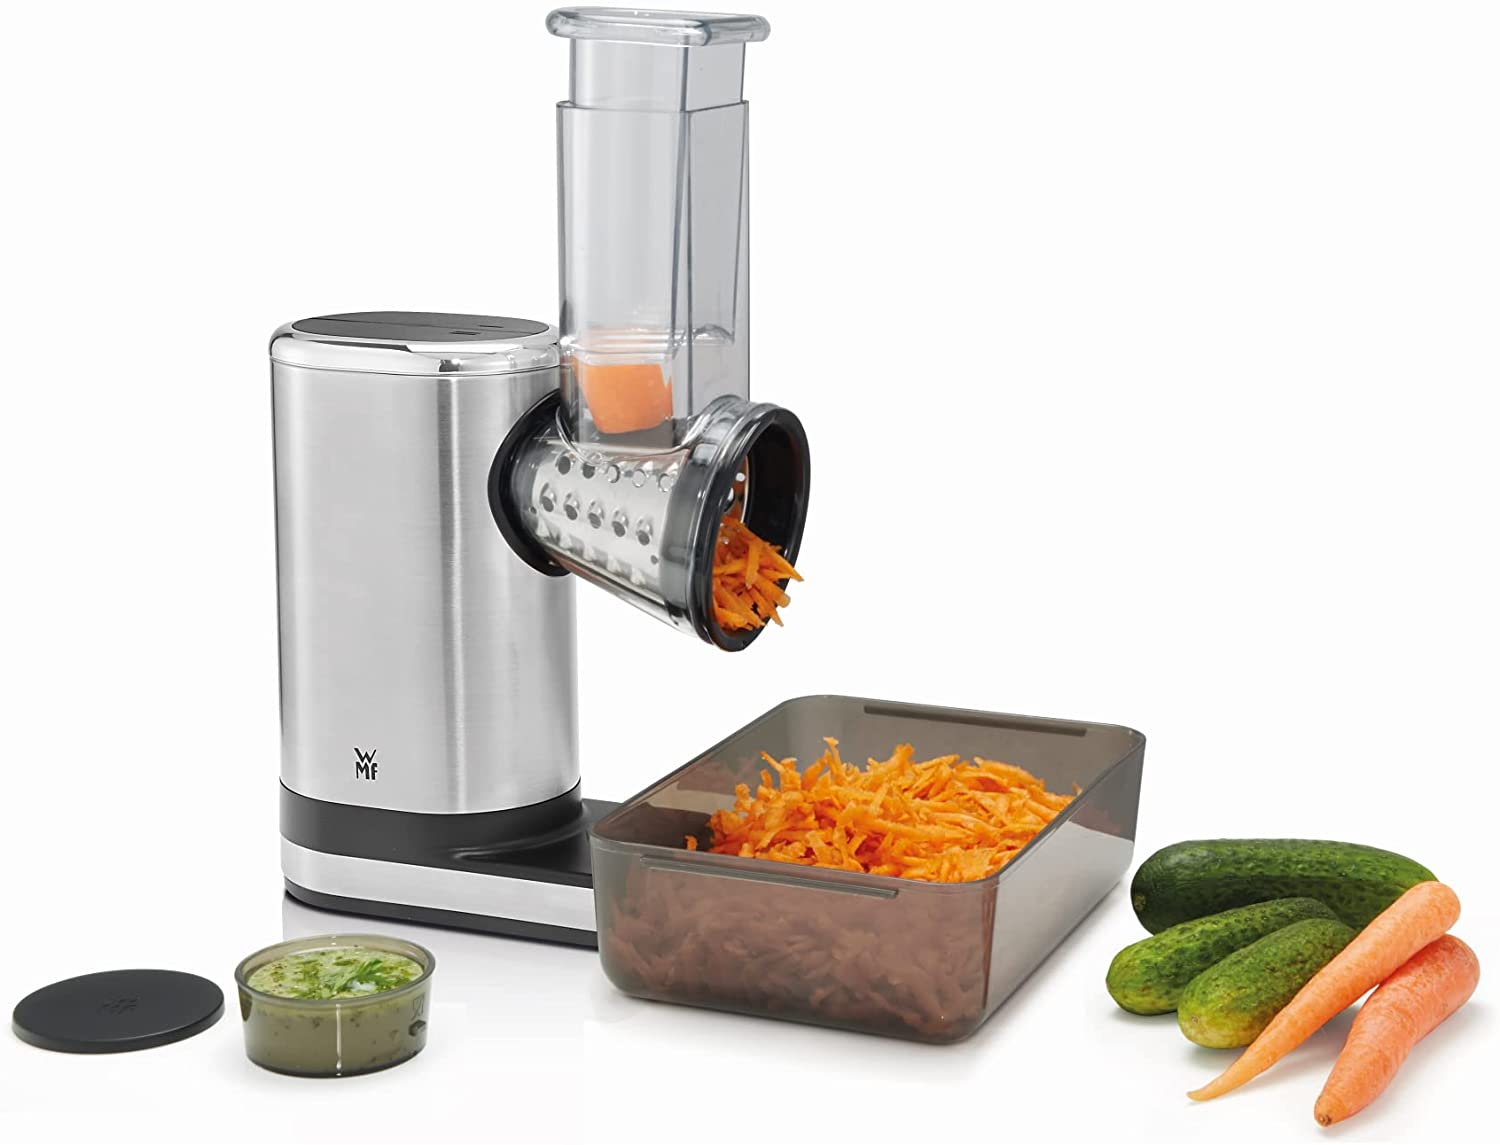 Wmf Küchenminis Salad Maker, Salad-to-Go, Electric Vegetable Slicer, 5 Inserts, incl. Salad to go box, 150 W